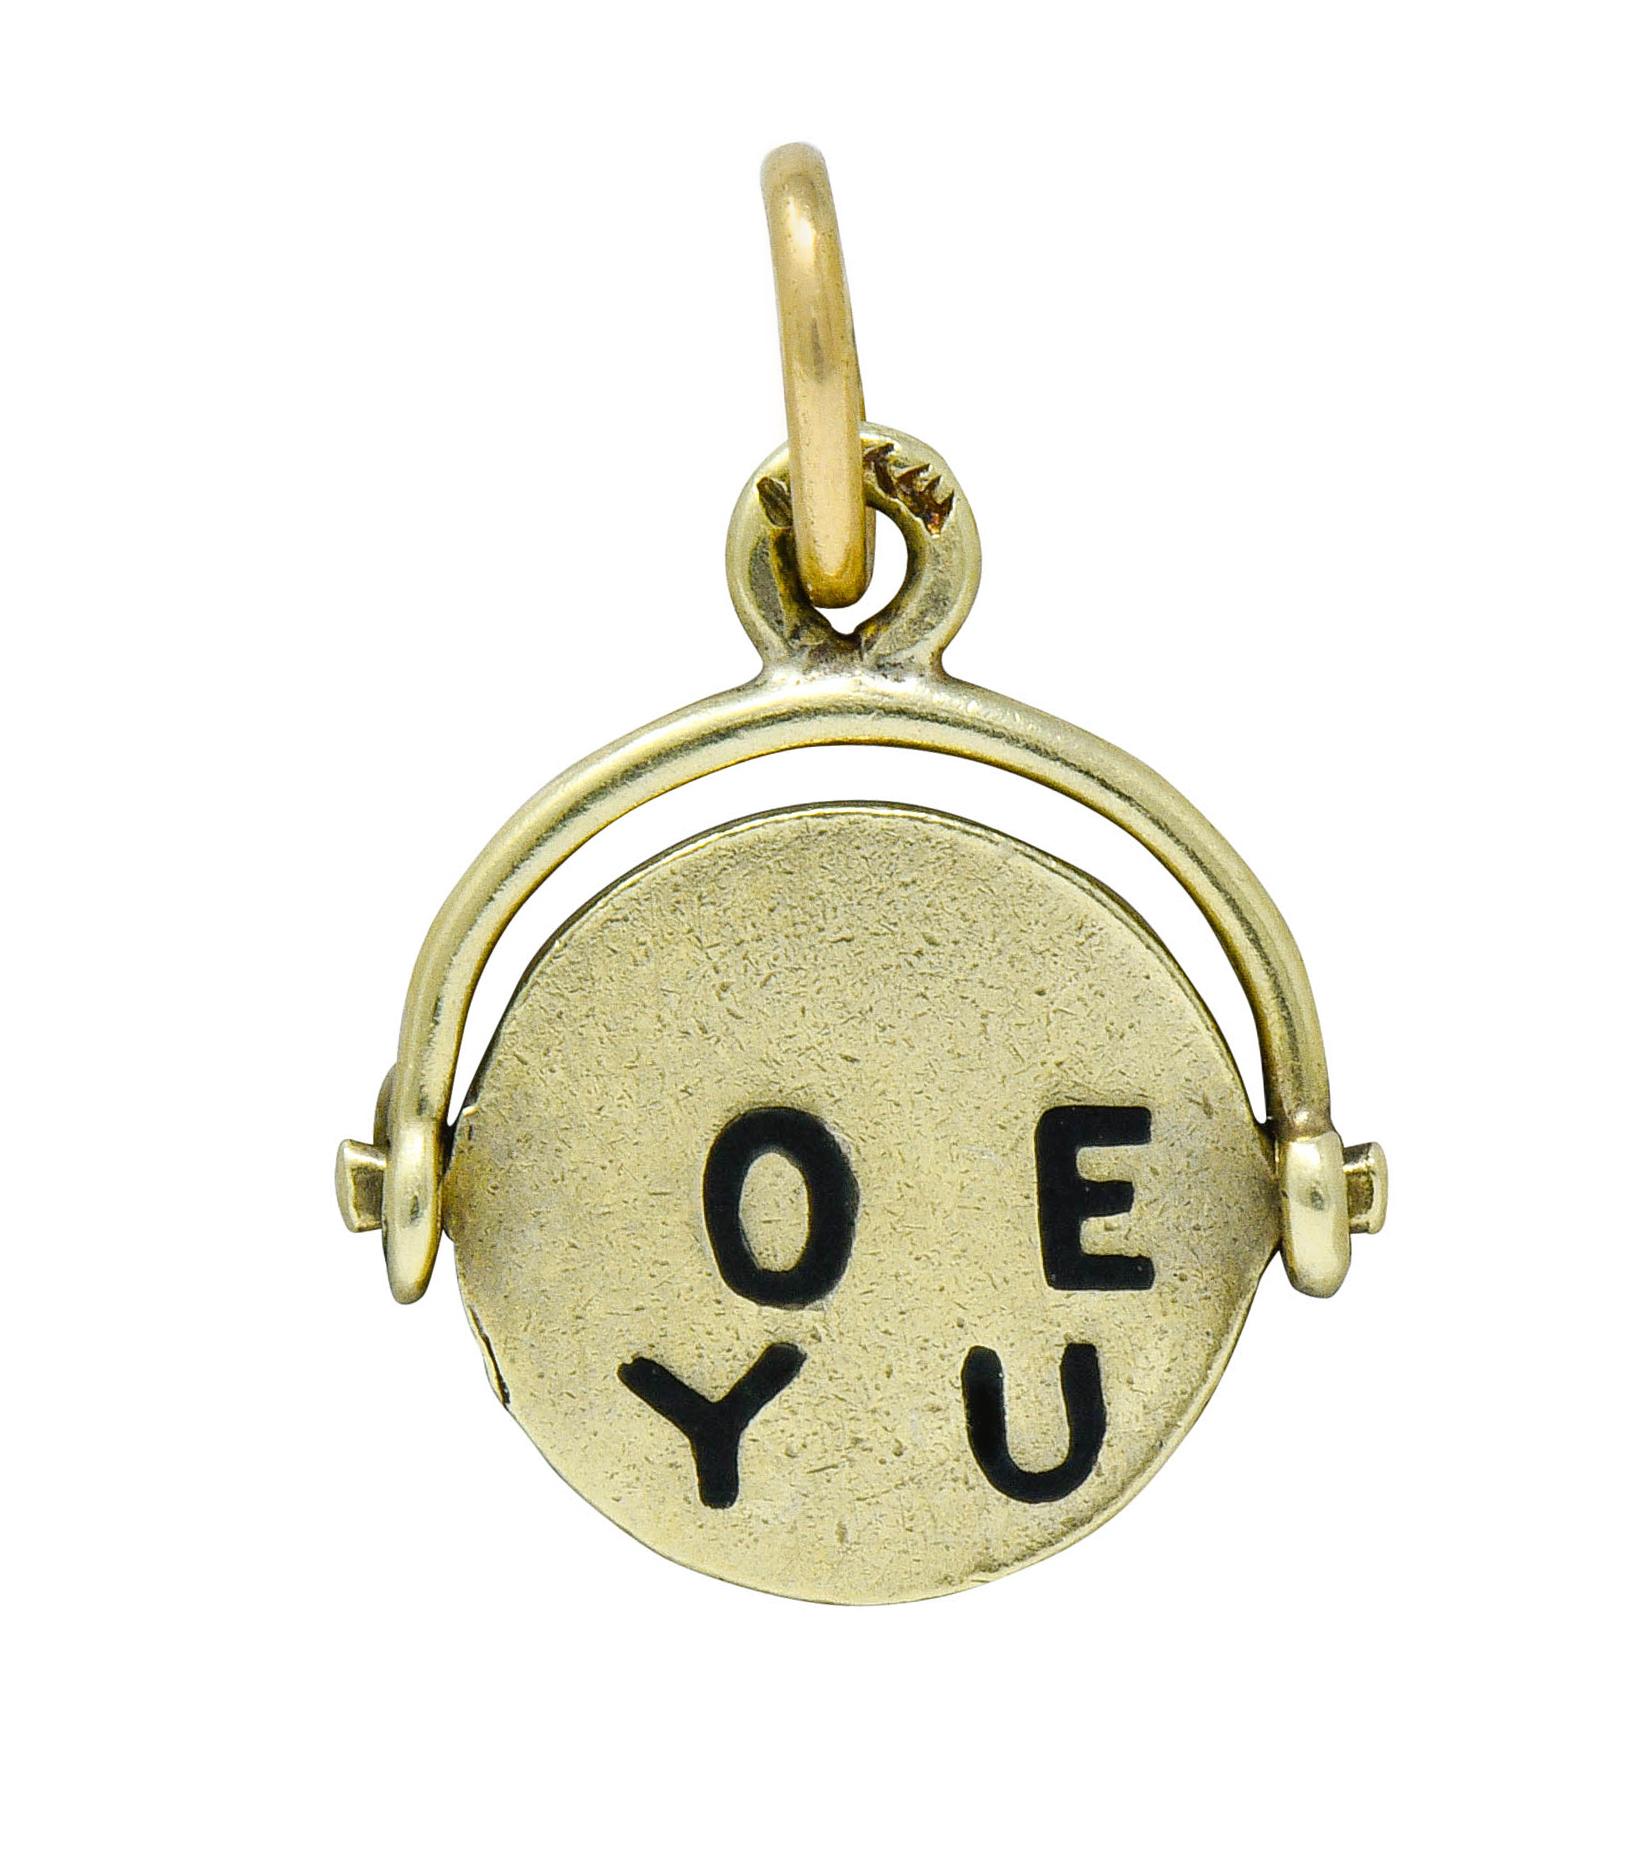 Charm is designed as a thaumatrope illusion with a rotating circular center

With black enamel letters the spell out 'I Love You' when spun

Maker's mark for Sloan & Co.

Stamped 14K for 14 karat gold

Circa: 1940s

Measures: 7/16 x 5/8 inch